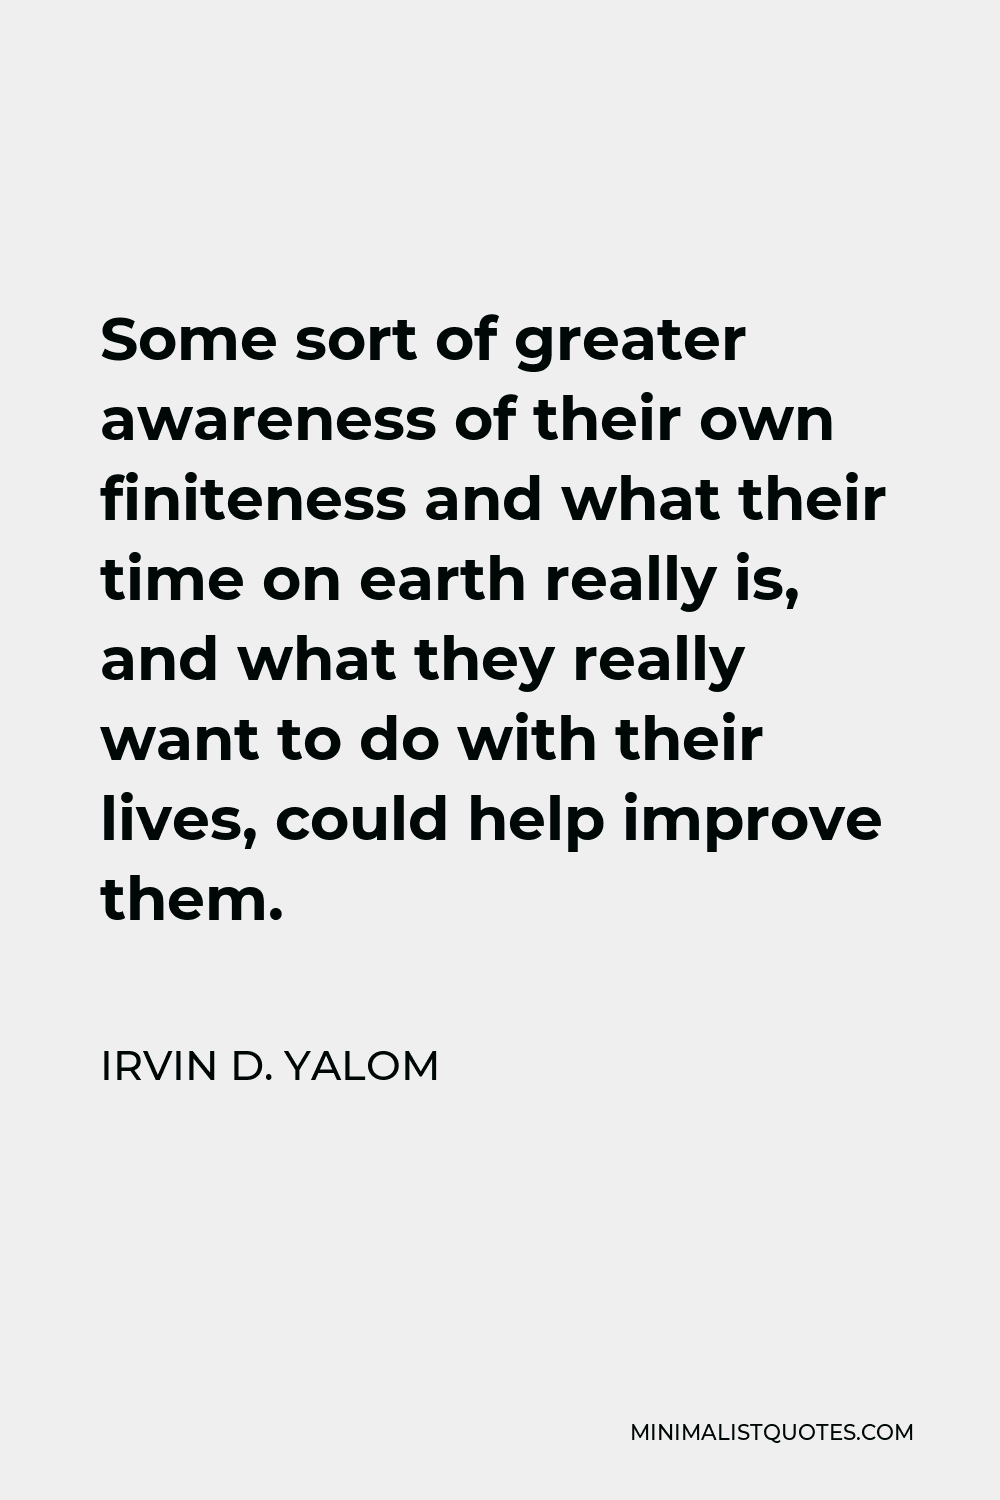 Irvin D. Yalom Quote - Some sort of greater awareness of their own finiteness and what their time on earth really is, and what they really want to do with their lives, could help improve them.